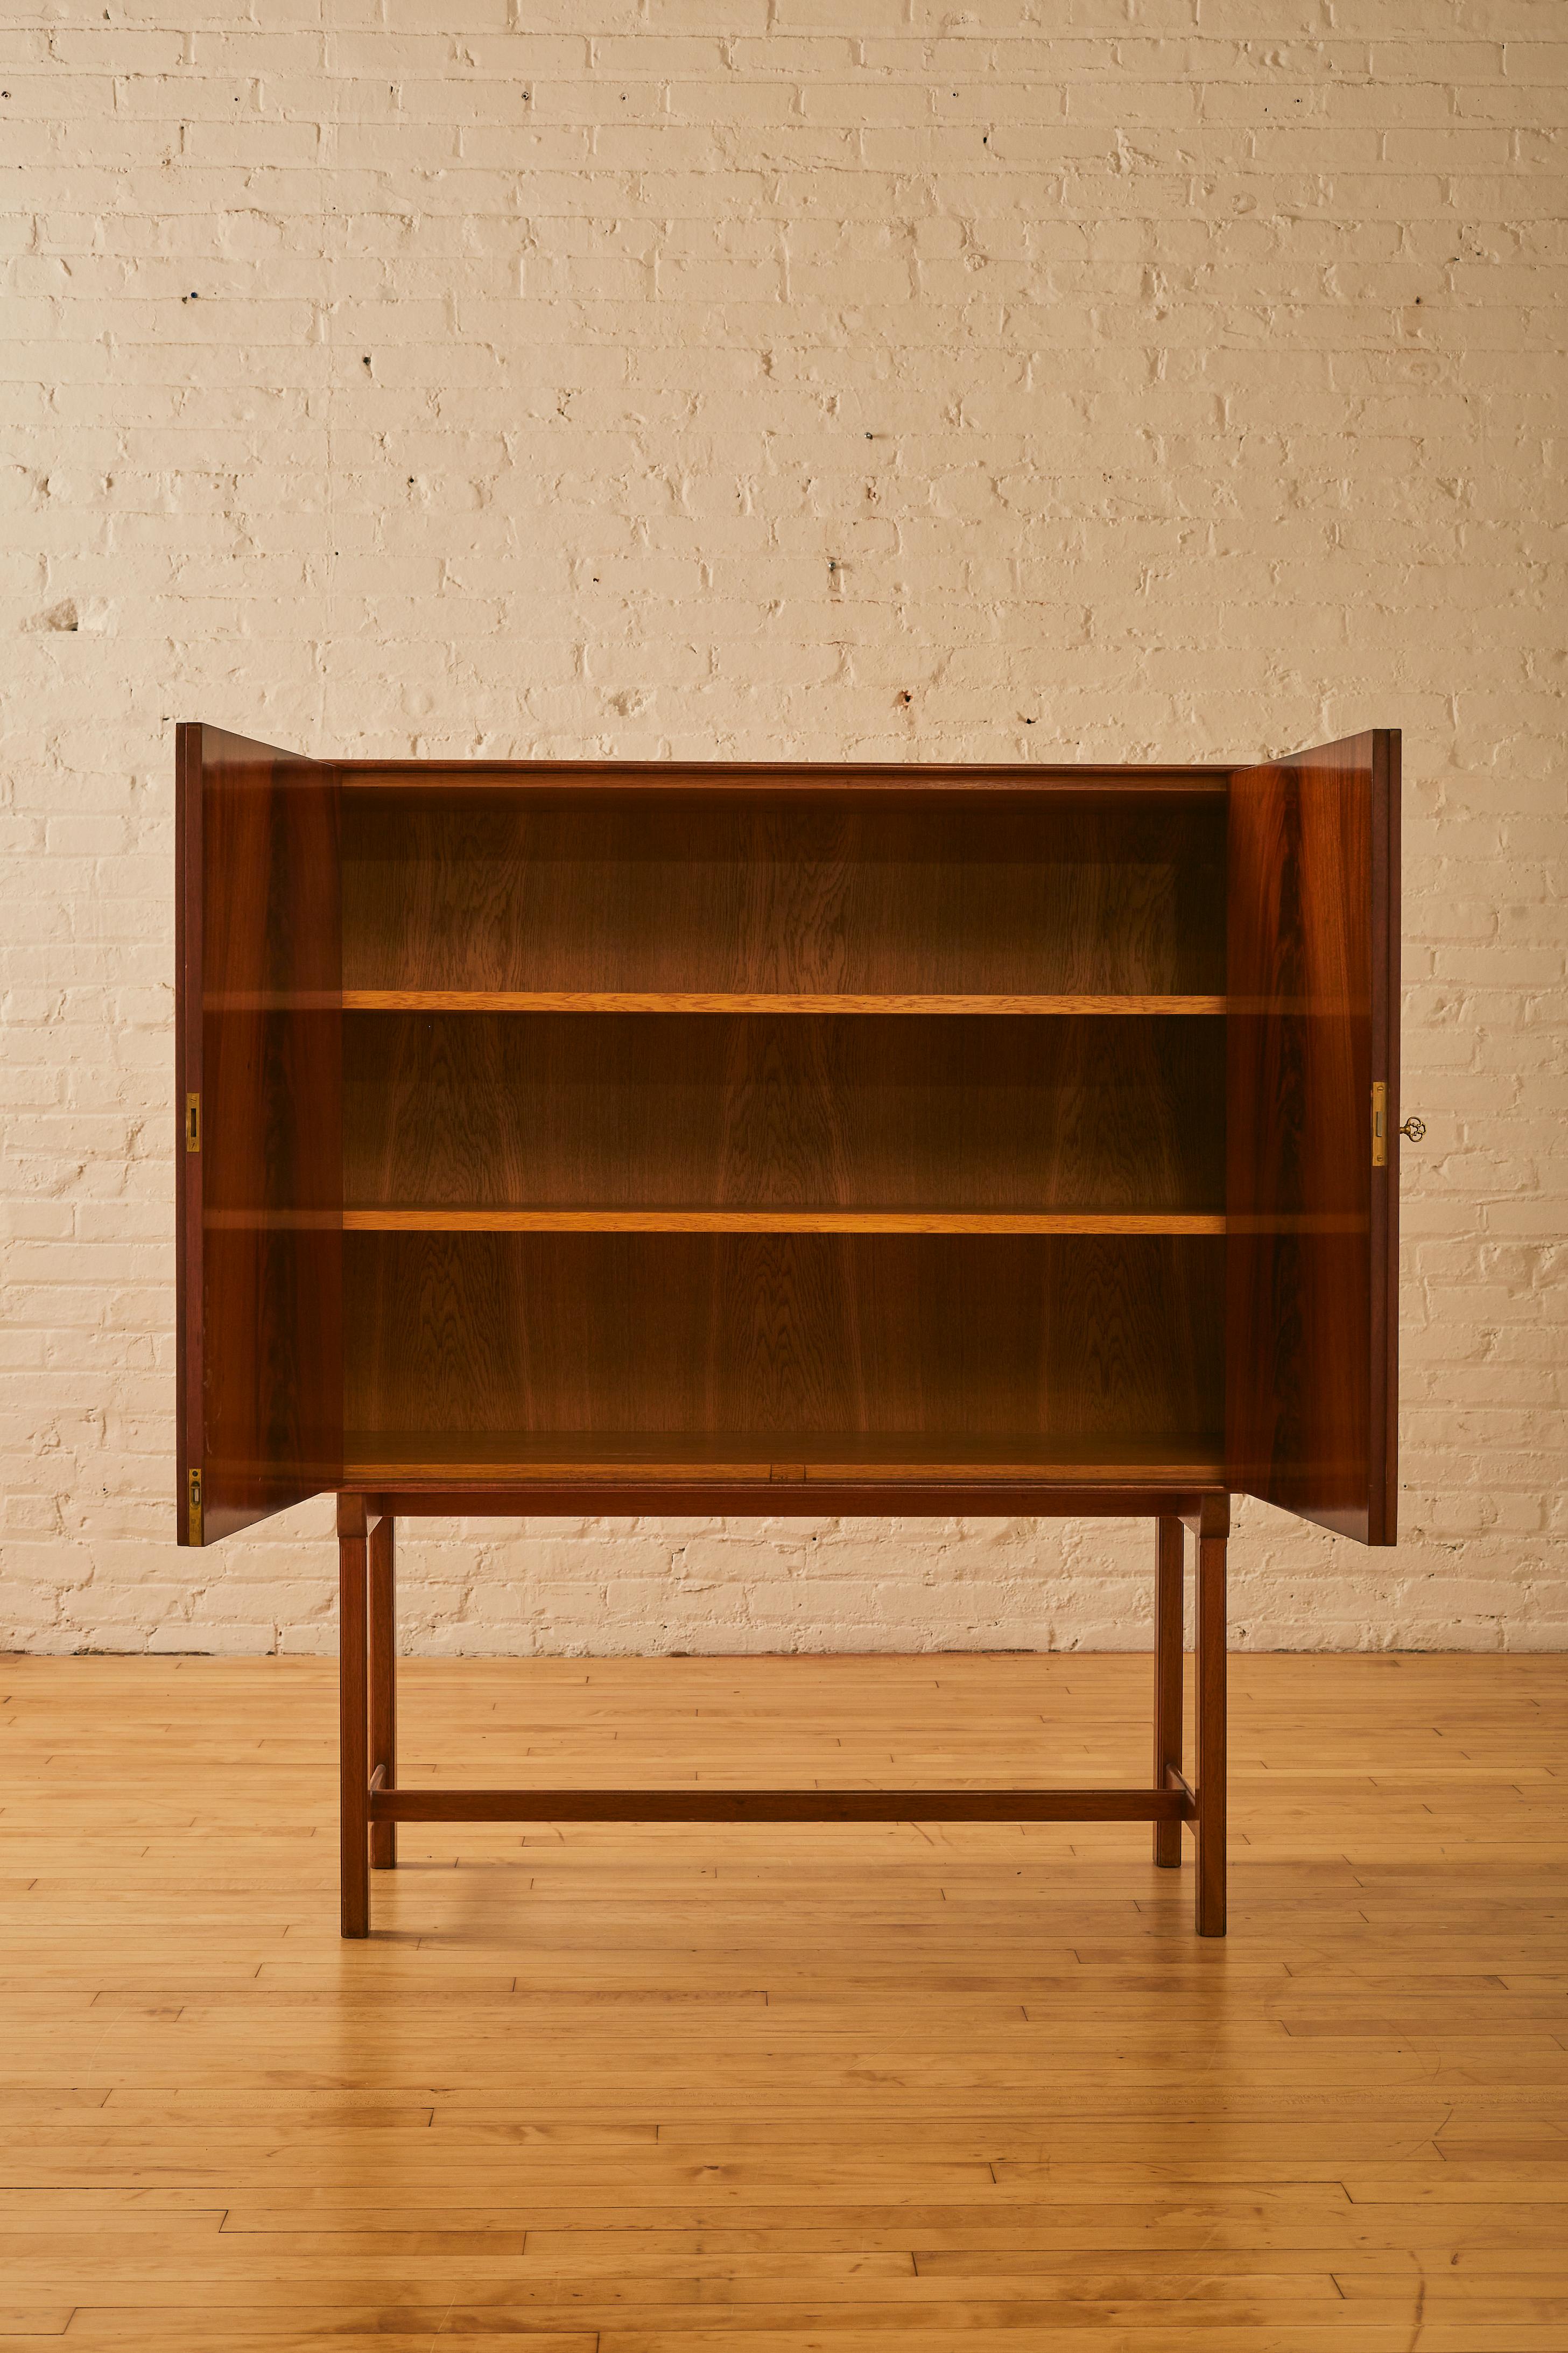 Tallboy Cabinet by Josef Frank ( Model 955 ) in mahogany with a brass key and joinery. 

About Josef Frank:

Josef Frank was one of early Vienna modernism’s foremost figures, but already in the beginning of the 1920s he started to question